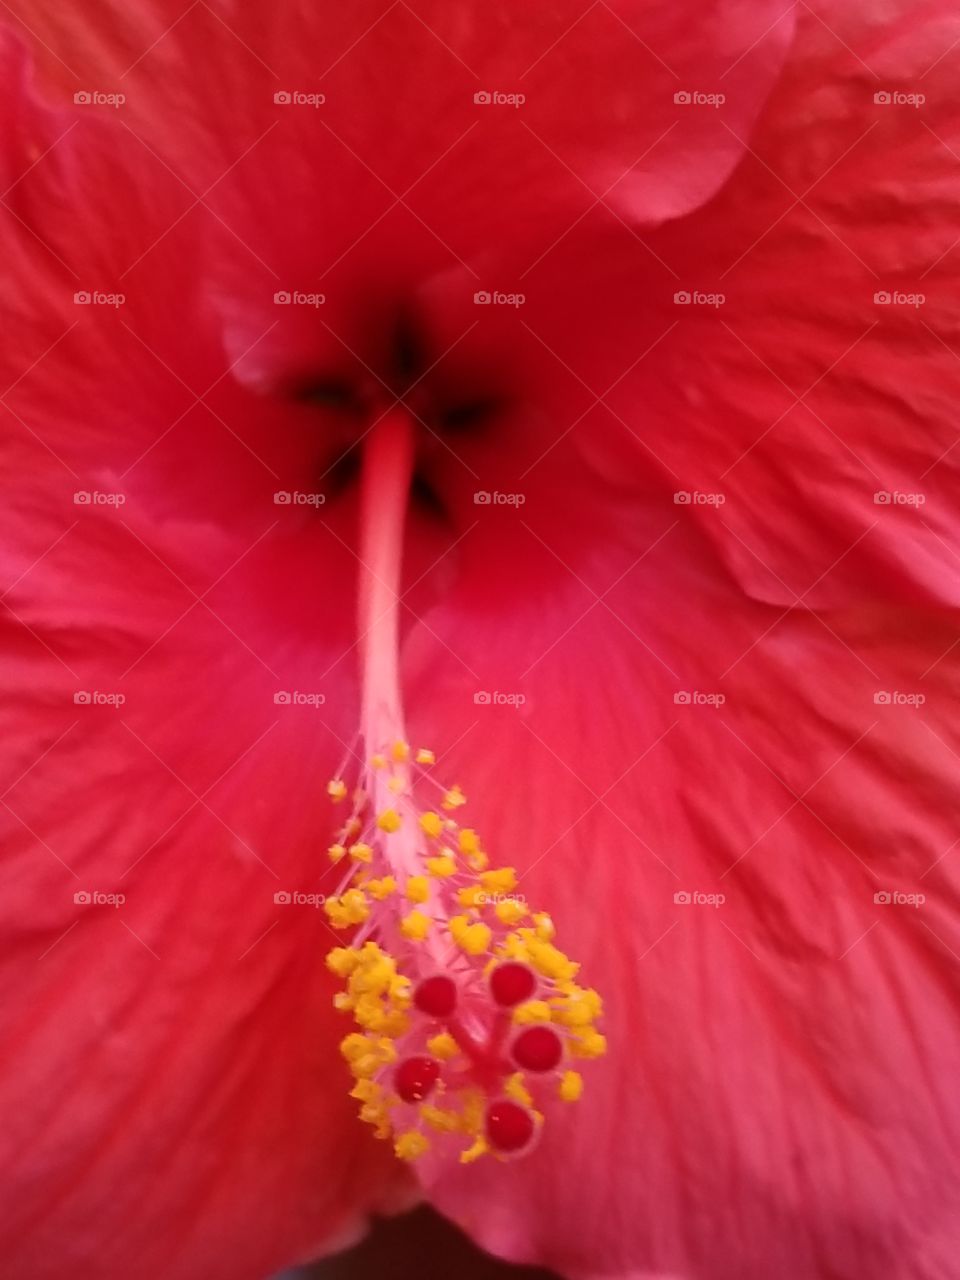 A hibiscus showing off. Gorgeous beautiful details